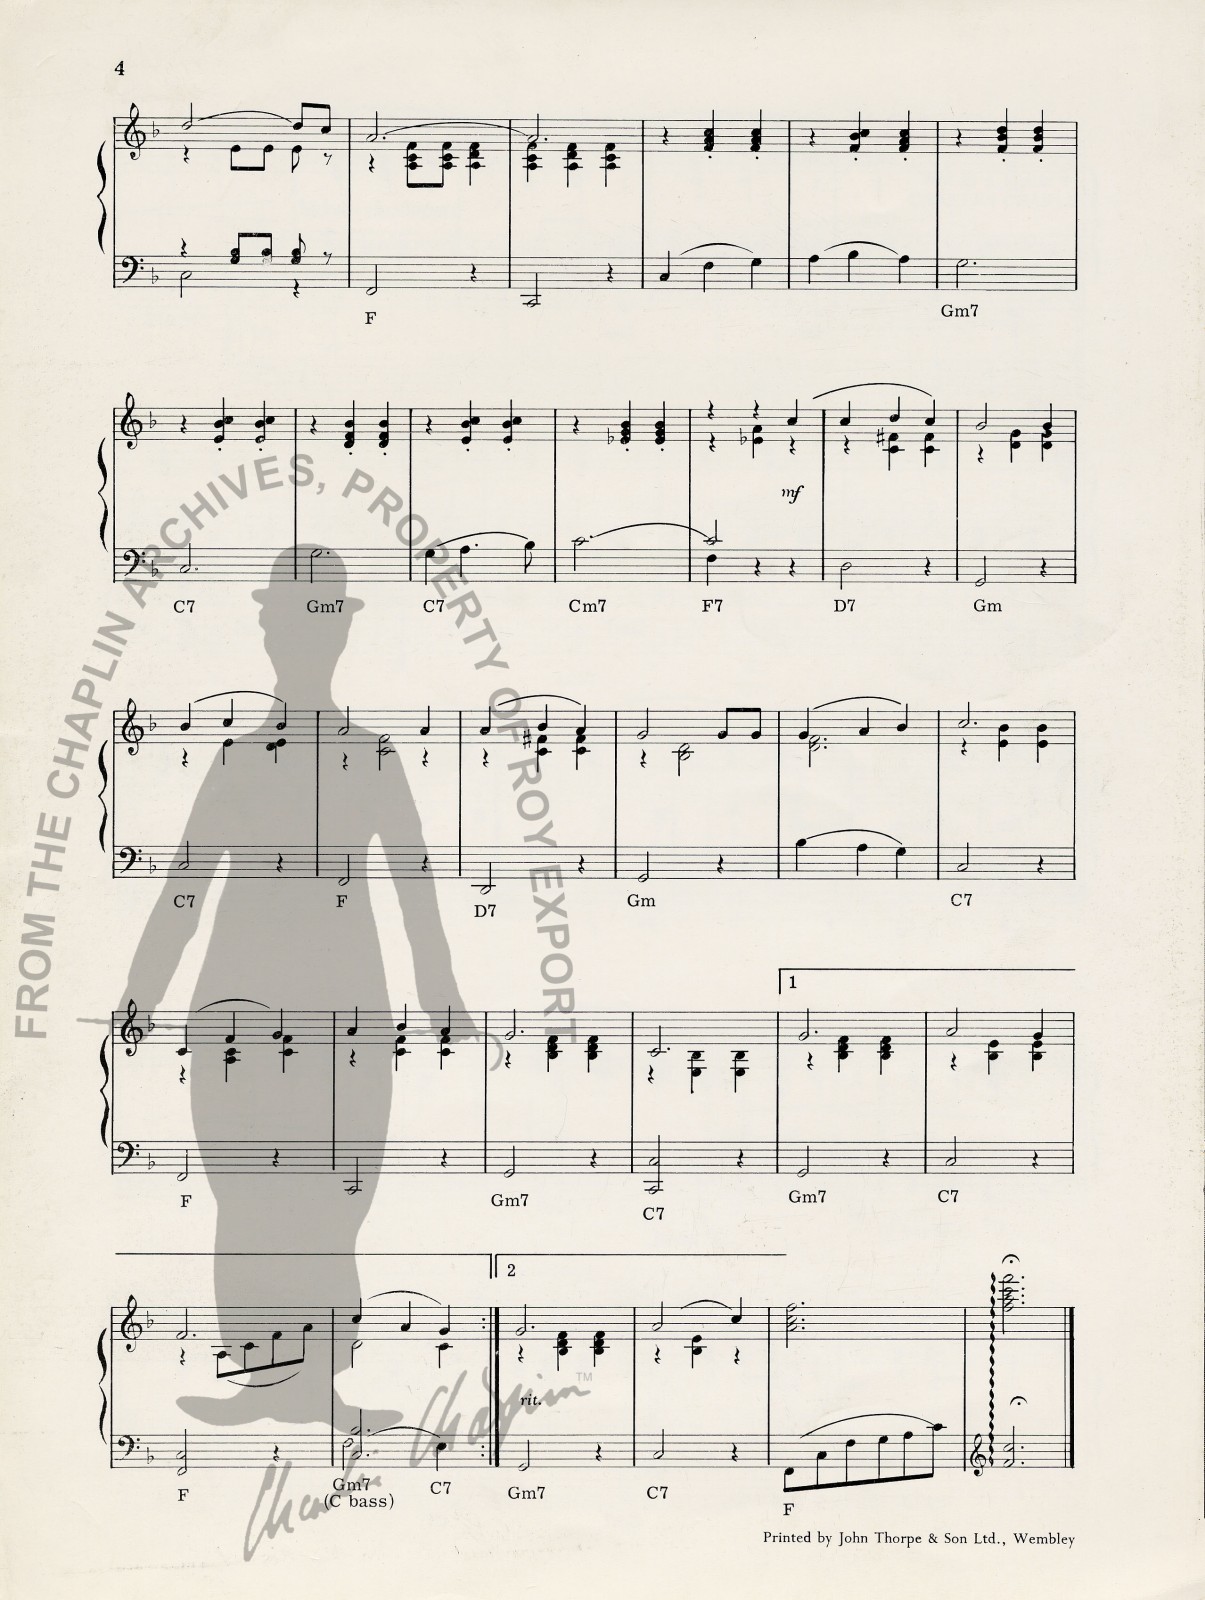 Topics, Topics, Oui! Tray Bong! : or my Pal Jones/written & composed by  Norton Atkins ; arranged by John S. Baker; Sung by Charles Chaplin